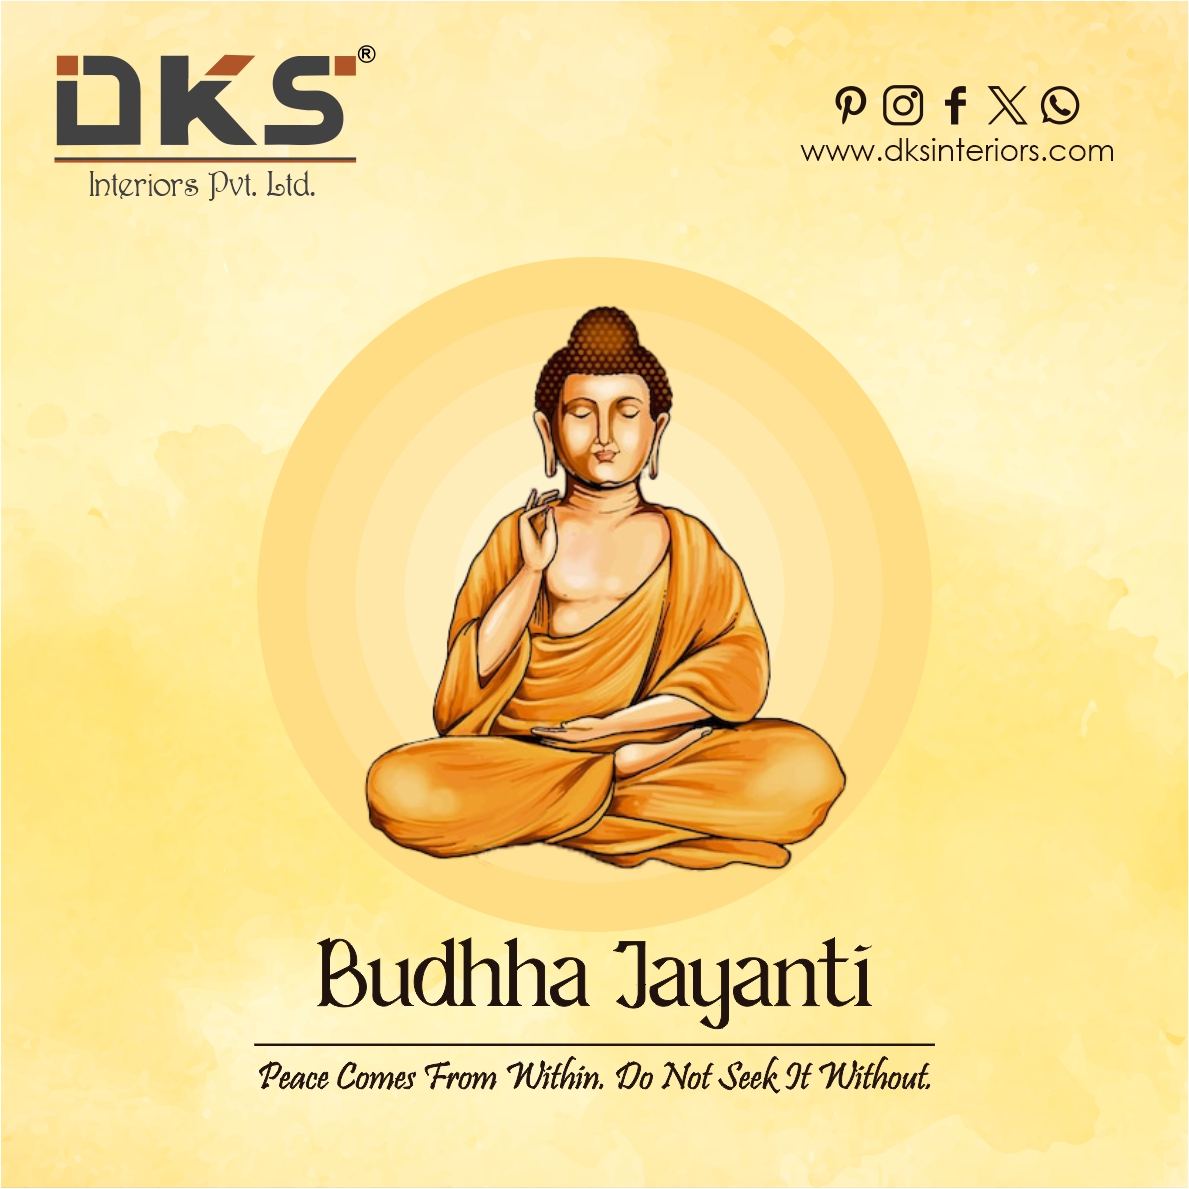 Peace Comes From Within, Do Not Seek It Without. Happy Budhha Jayanti!
.
Checkout Our Website:
dksinteriors.com
.
Tags:
#interiordesign #design #interior #homedecor #architecture #home #decor #interiors #homedesign #art #interiordesigner #furnituredesign #decoration